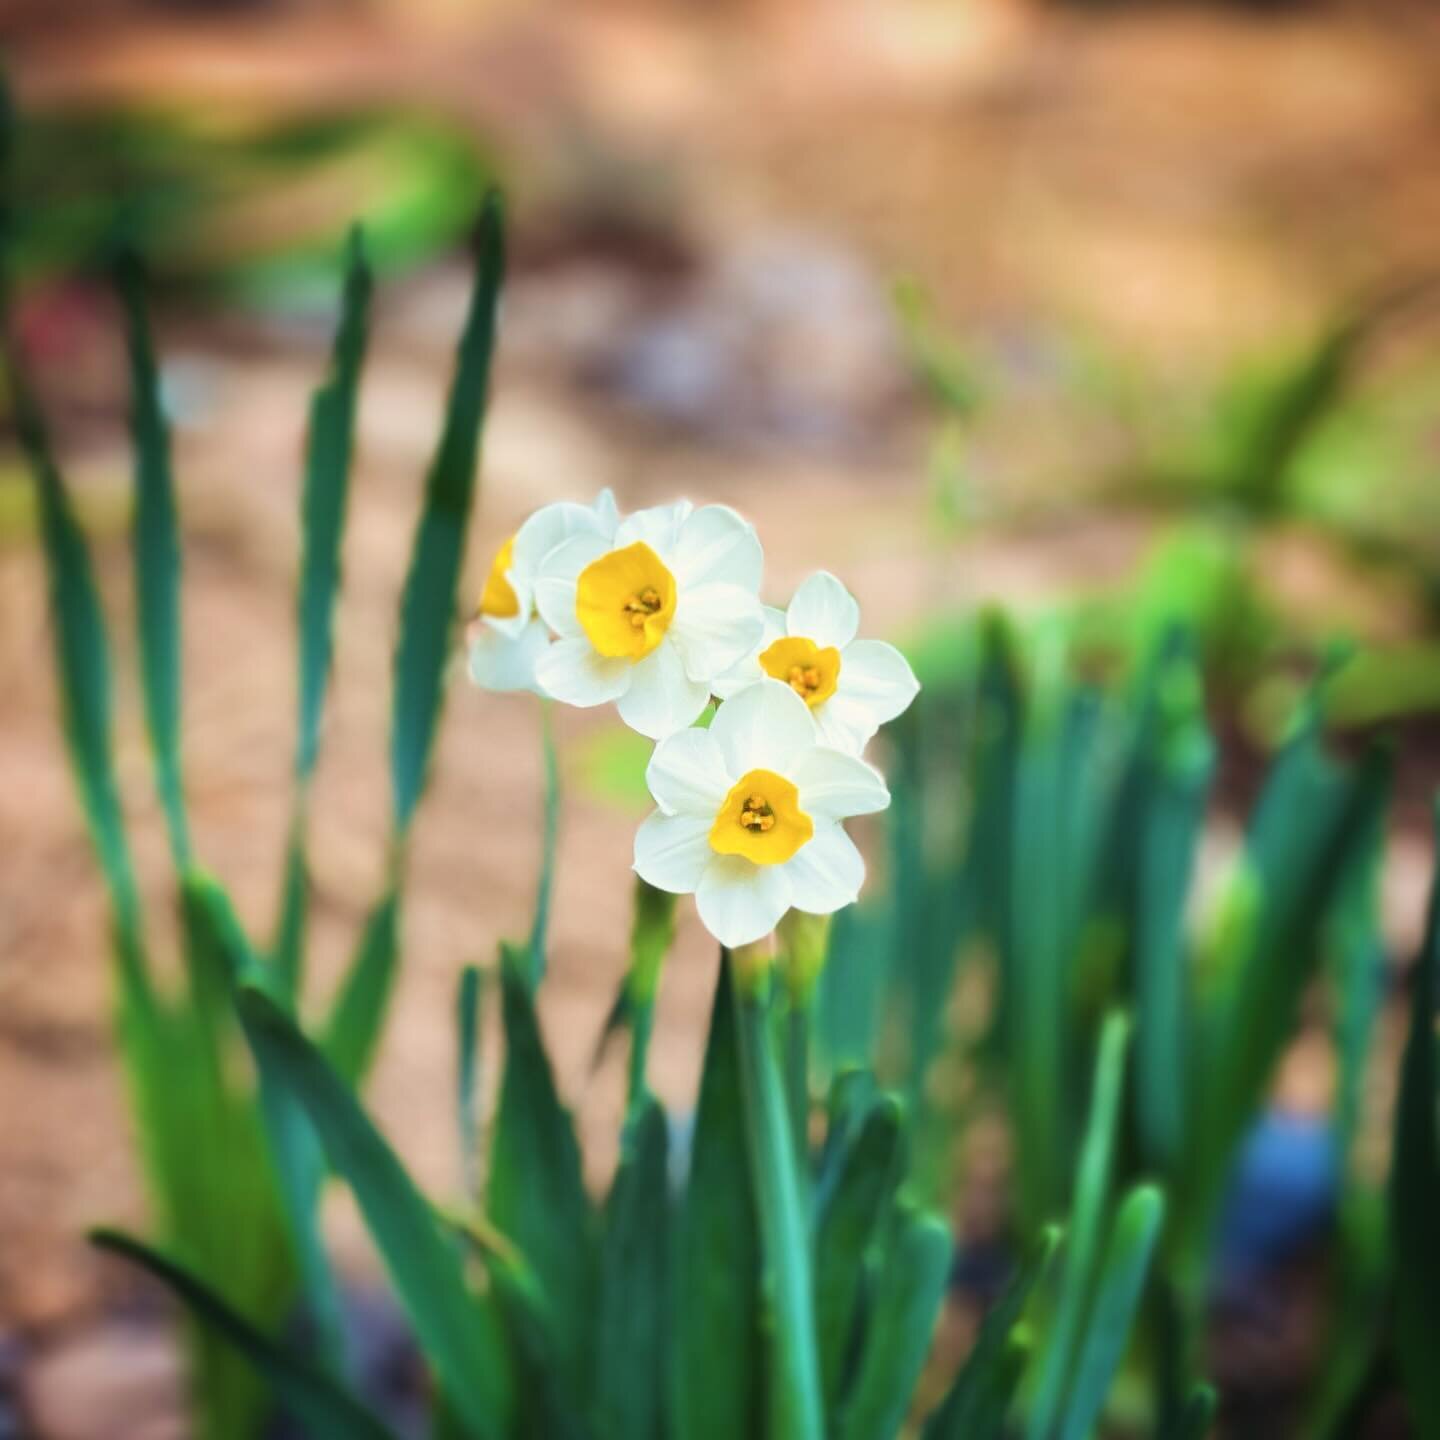 Our little #garden is starting to #bloom for #spring! Hello #narcissus 🌼 Here&rsquo;s to creating #delight with #nature 🥂

#urbangarden #communitygarden #chinesenewyear